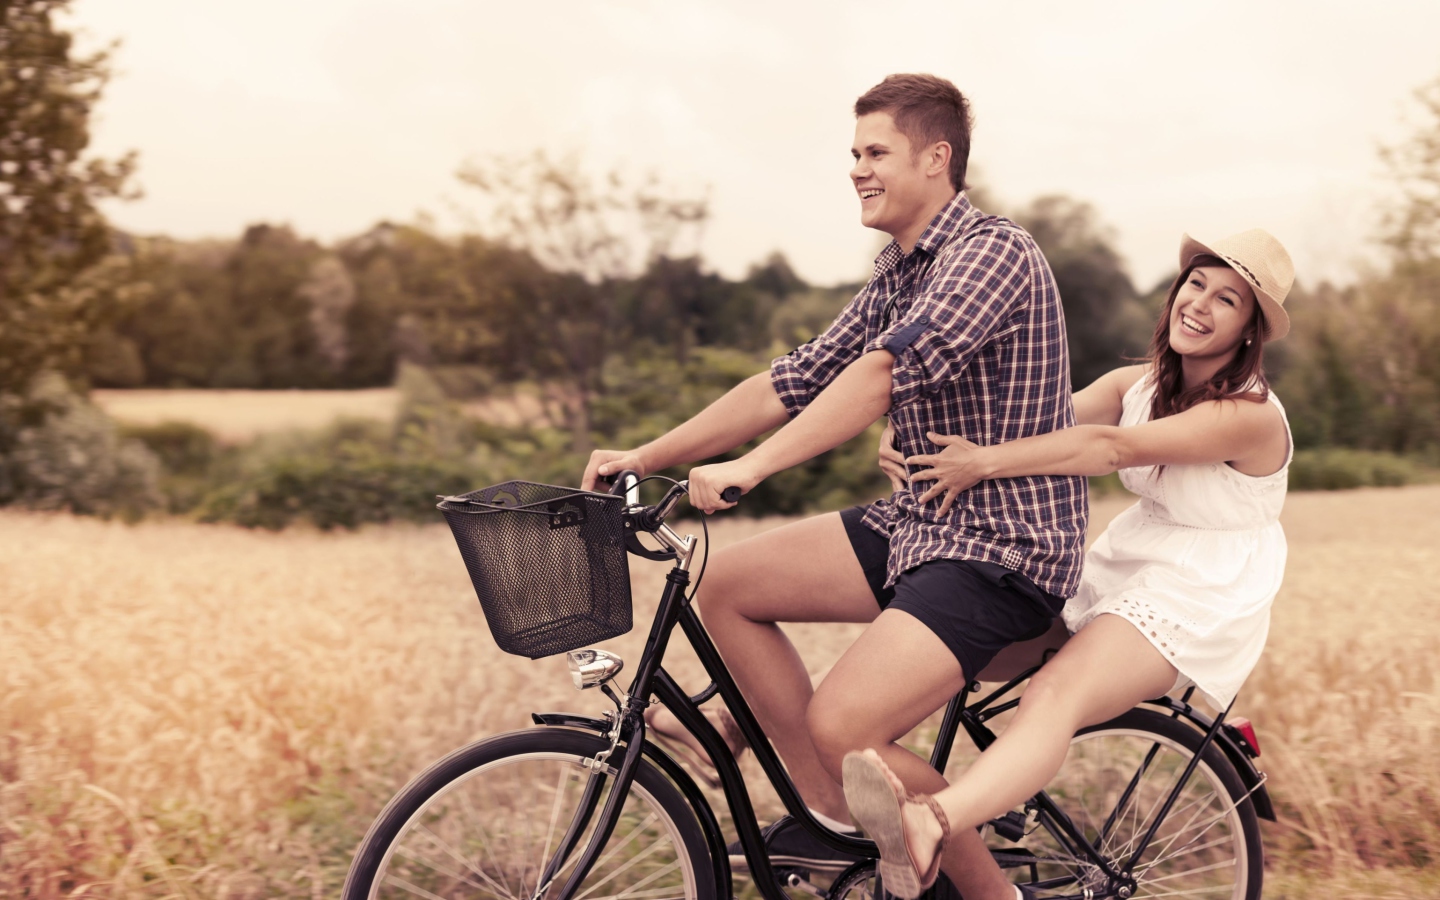 Couple On Bicycle wallpaper 1440x900